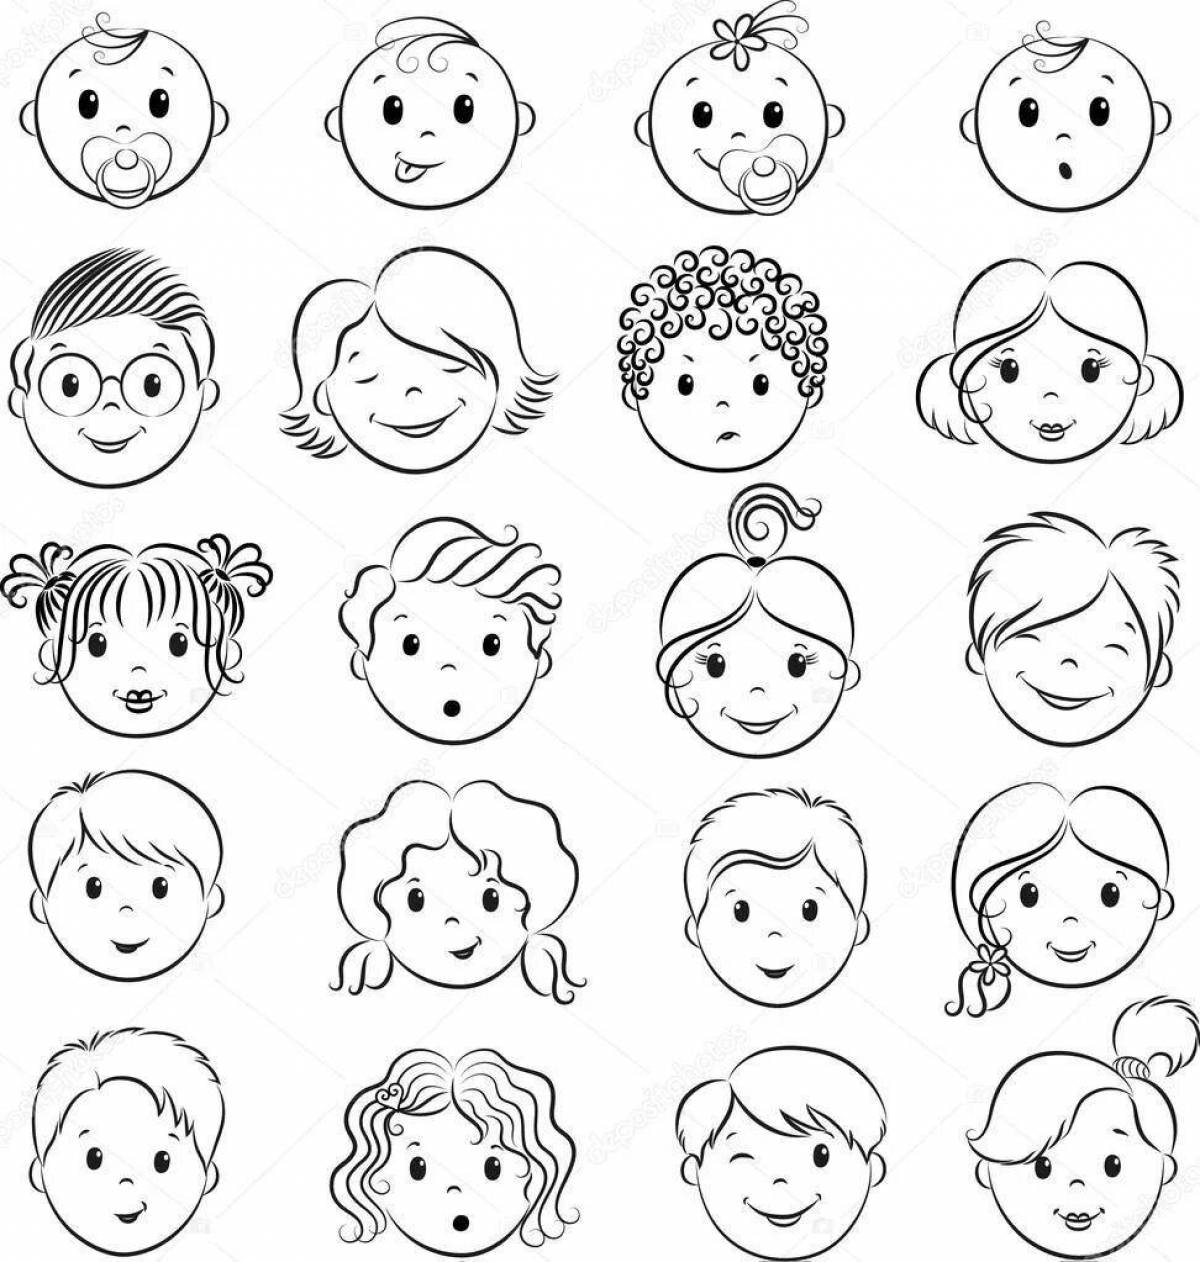 Coloring page delight human emotions